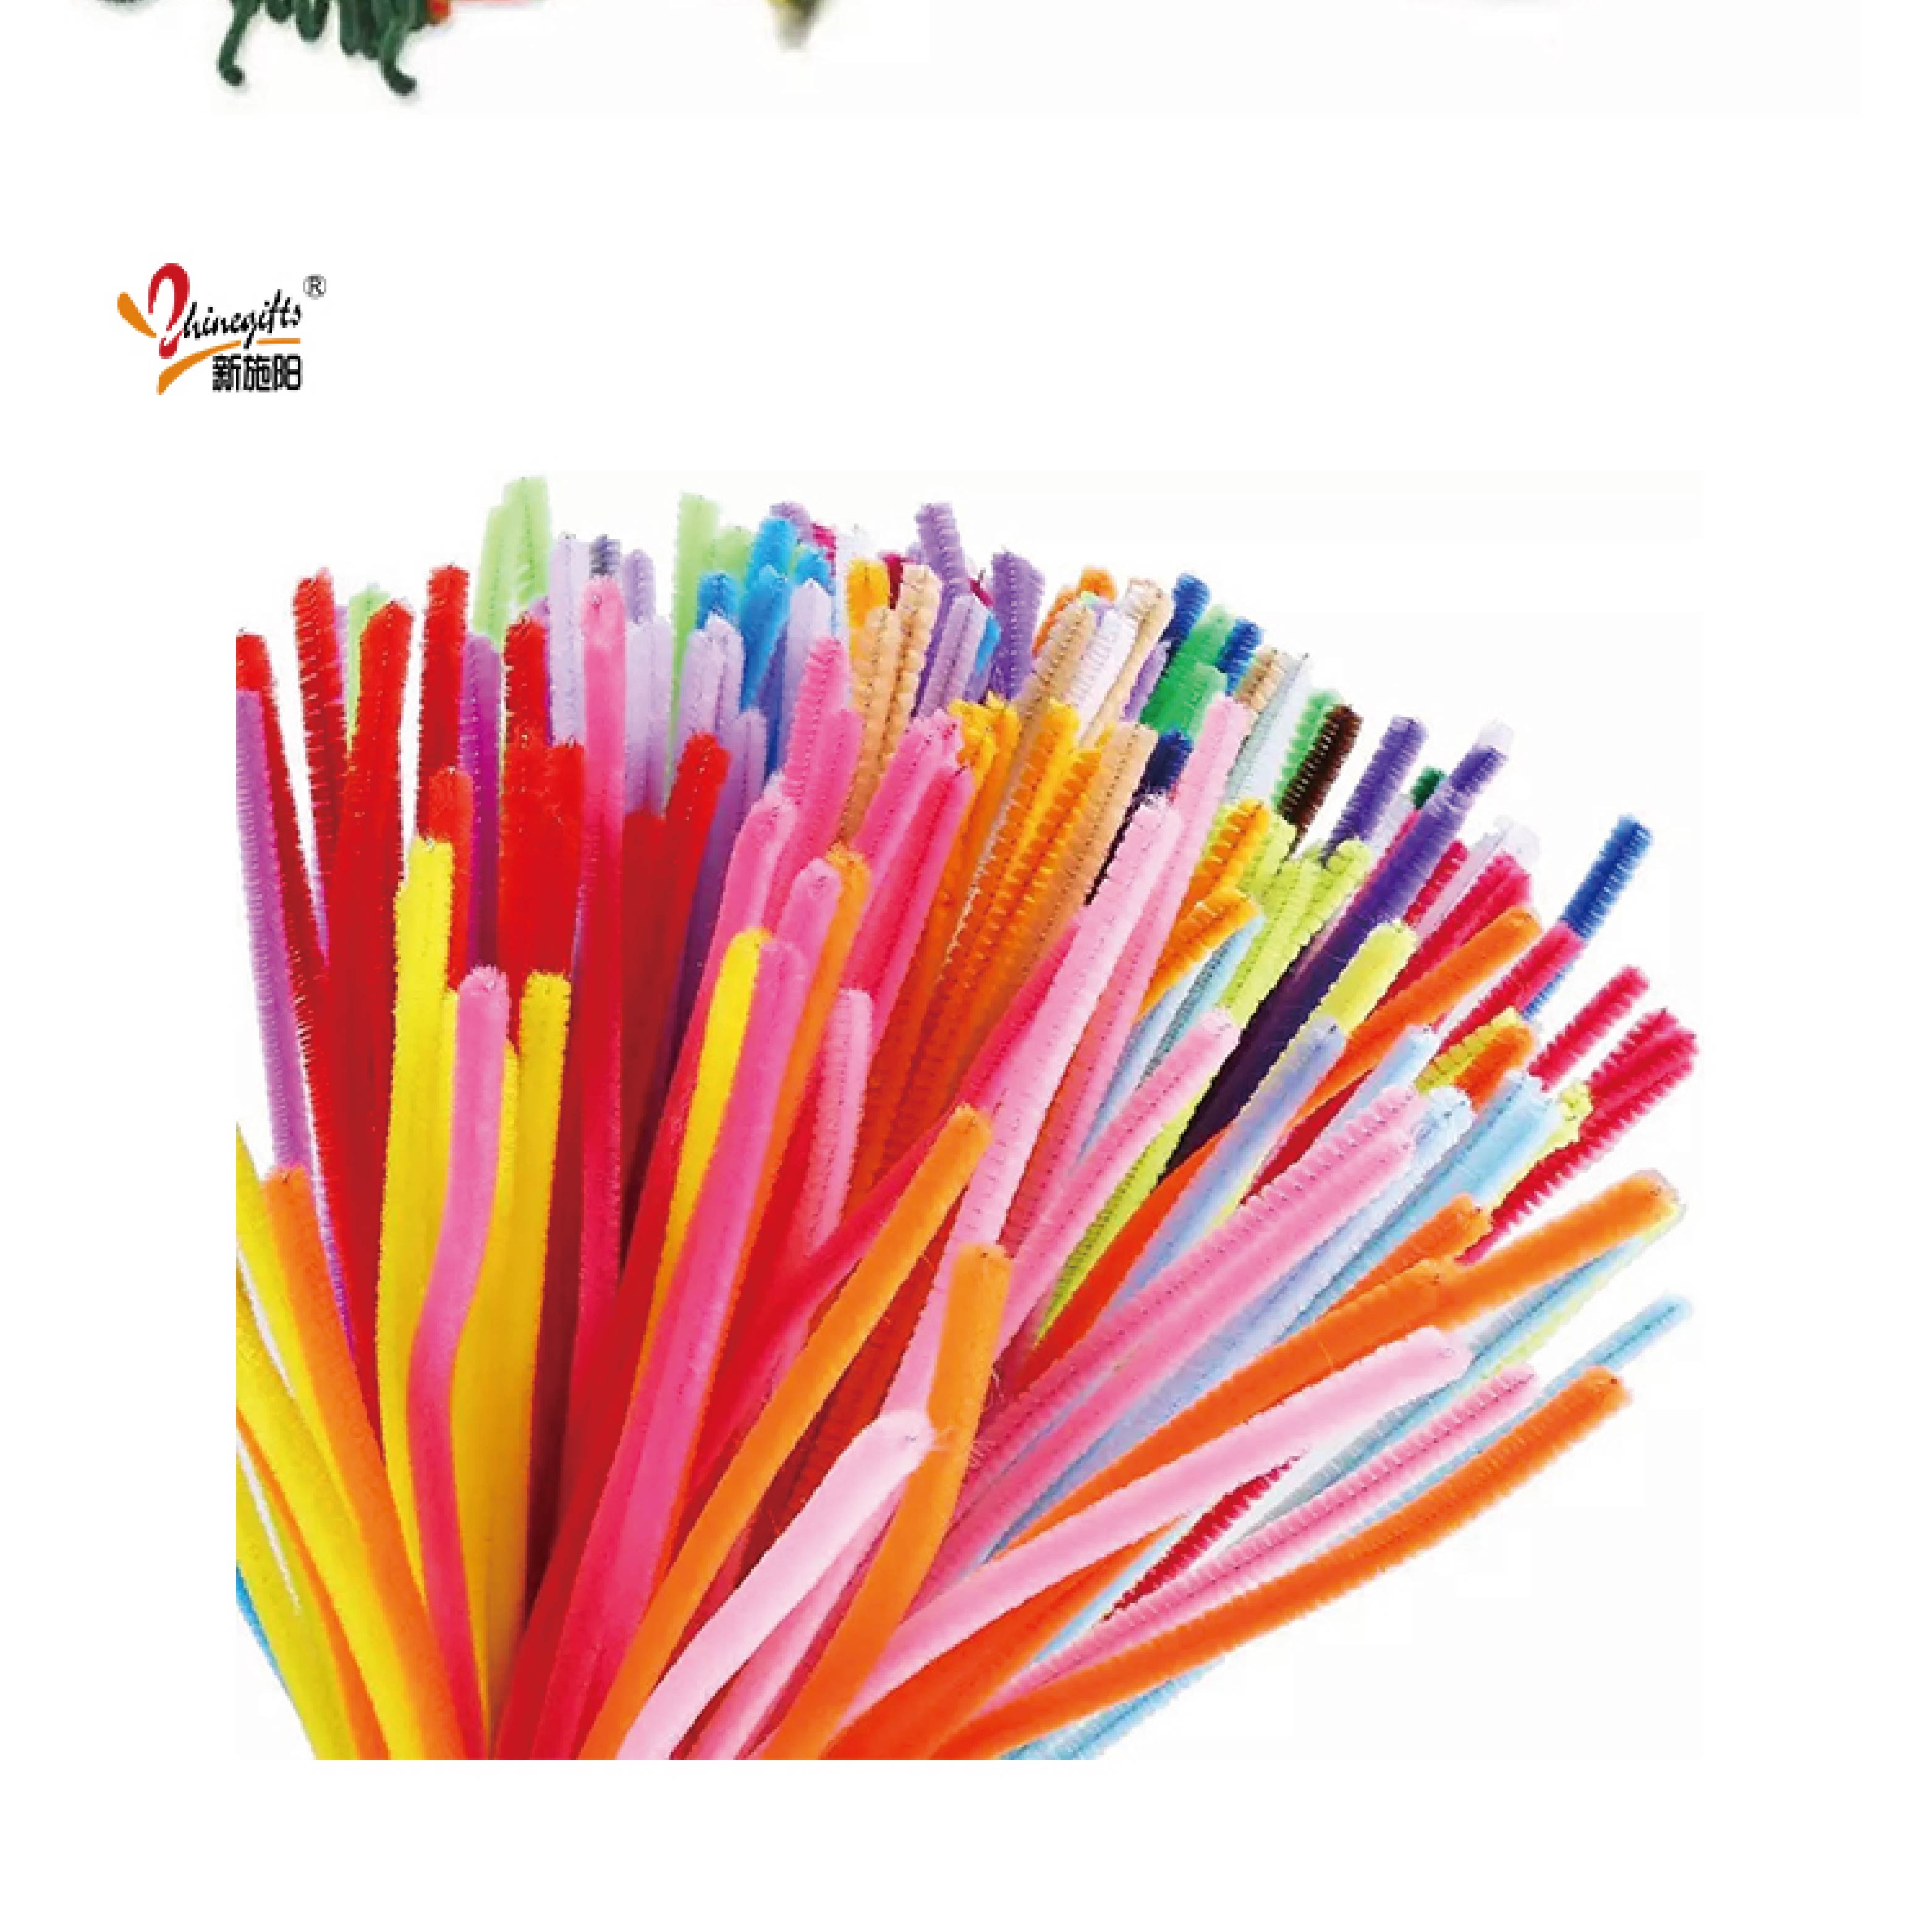 Diy Children Education Toy Single Color Chenille Stems Colorful Craft Chenille Stem Pipe Cleaners For Art